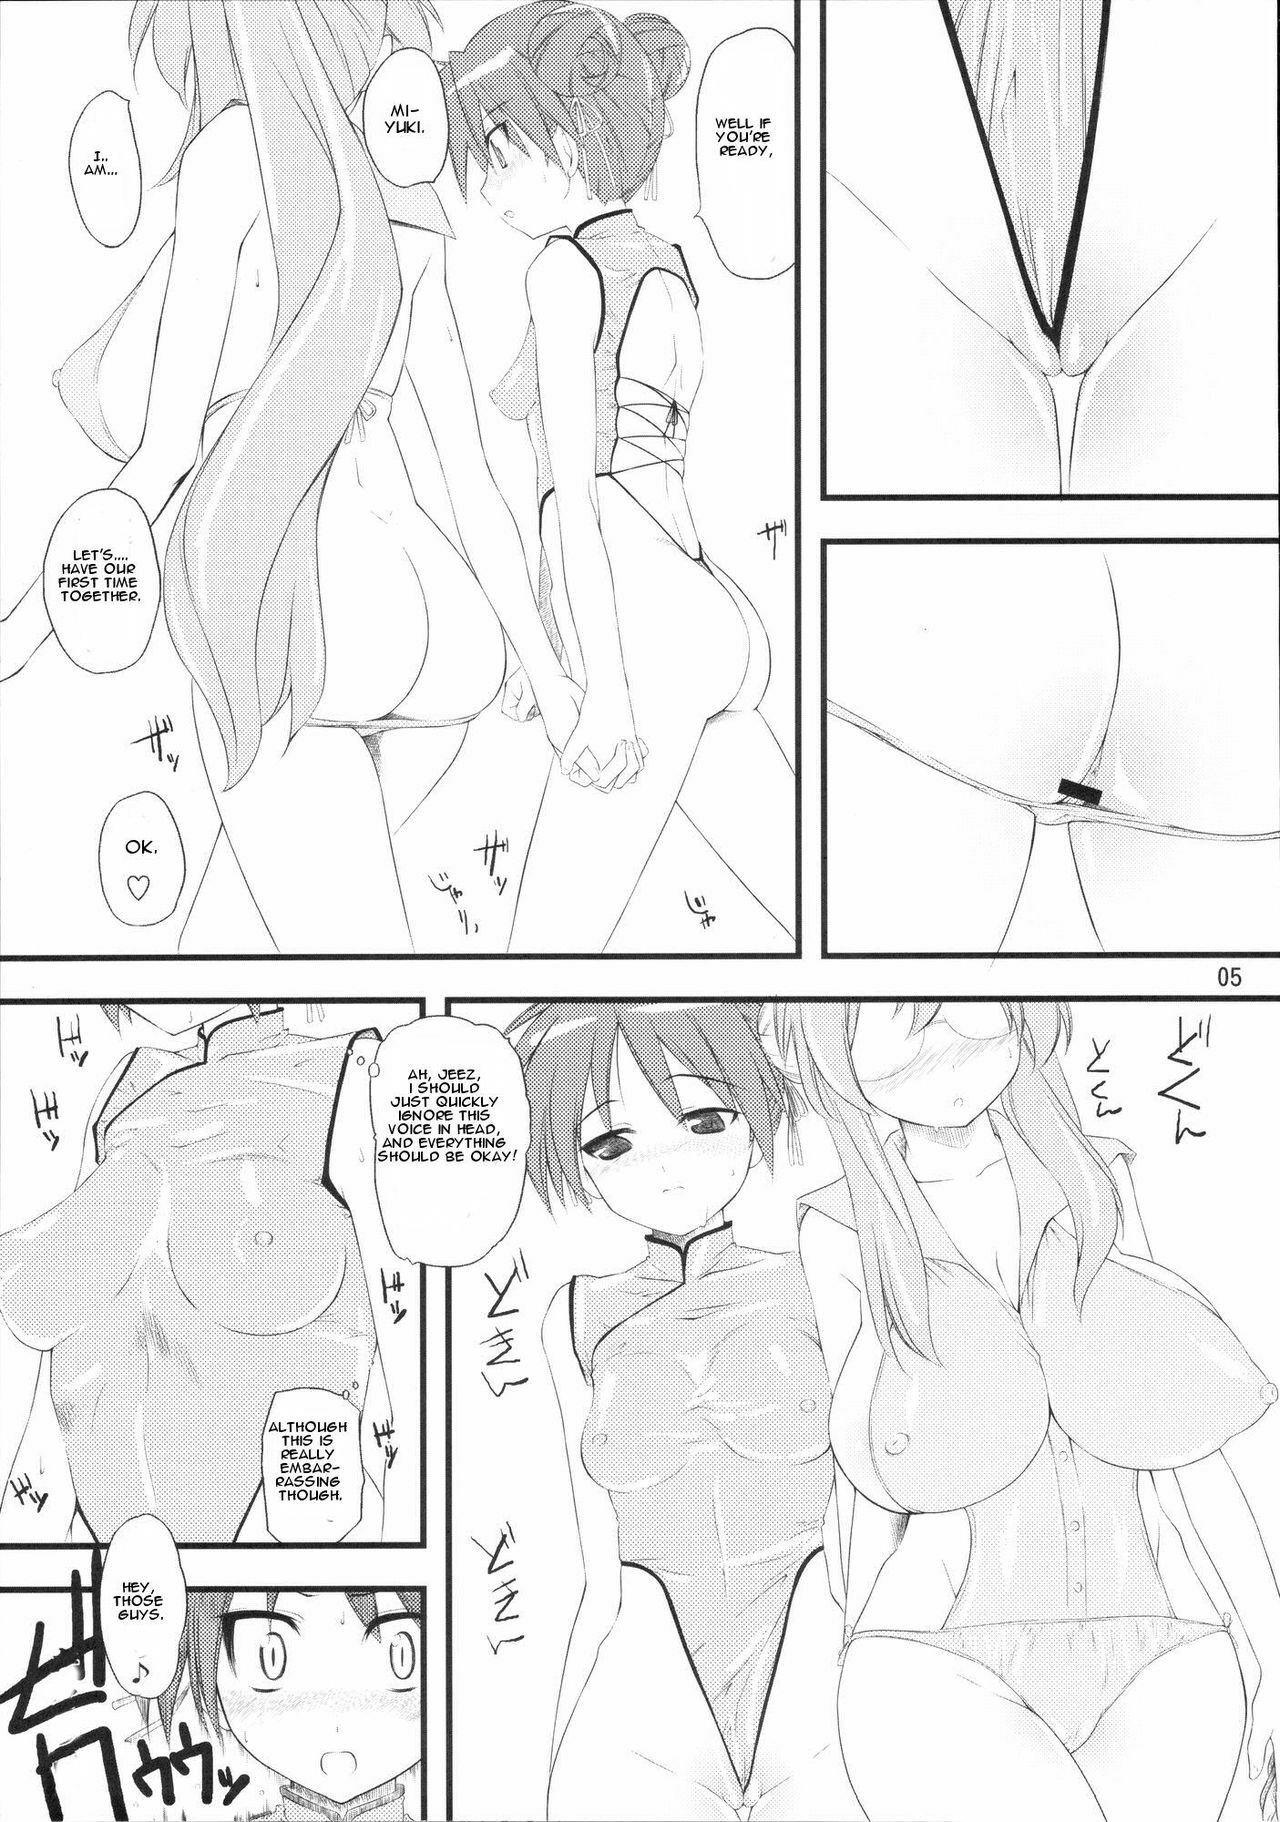 (C72) [Hi-PER PINCH (clover)] Natsu in Summer (Lucky Star) [English] [CGrascal] page 4 full